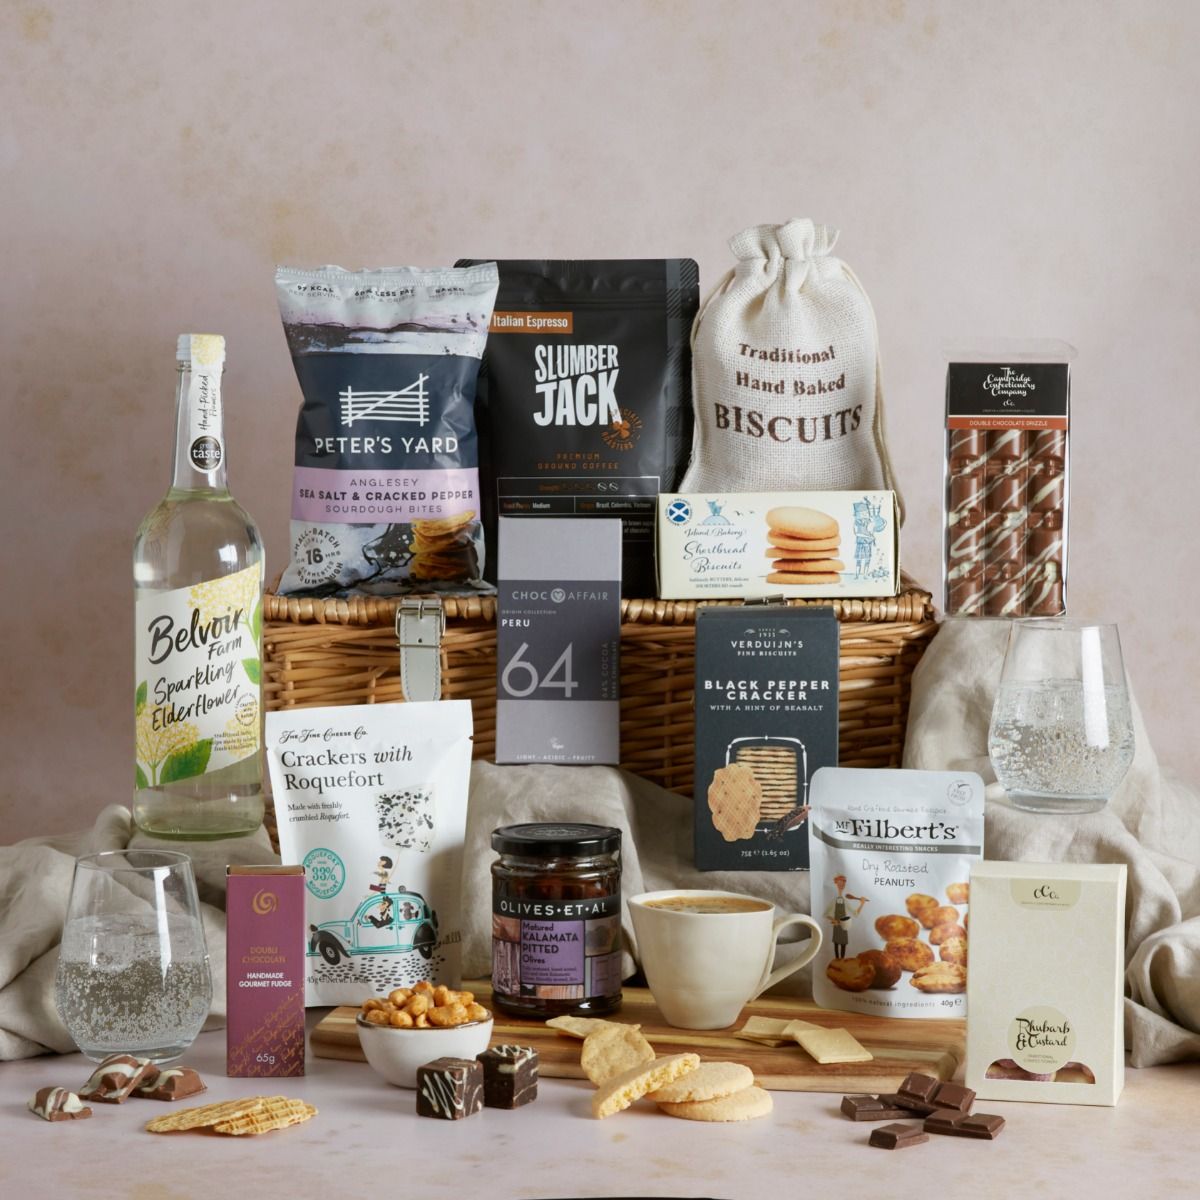 The Classic Alcohol Free Hamper with contents on display